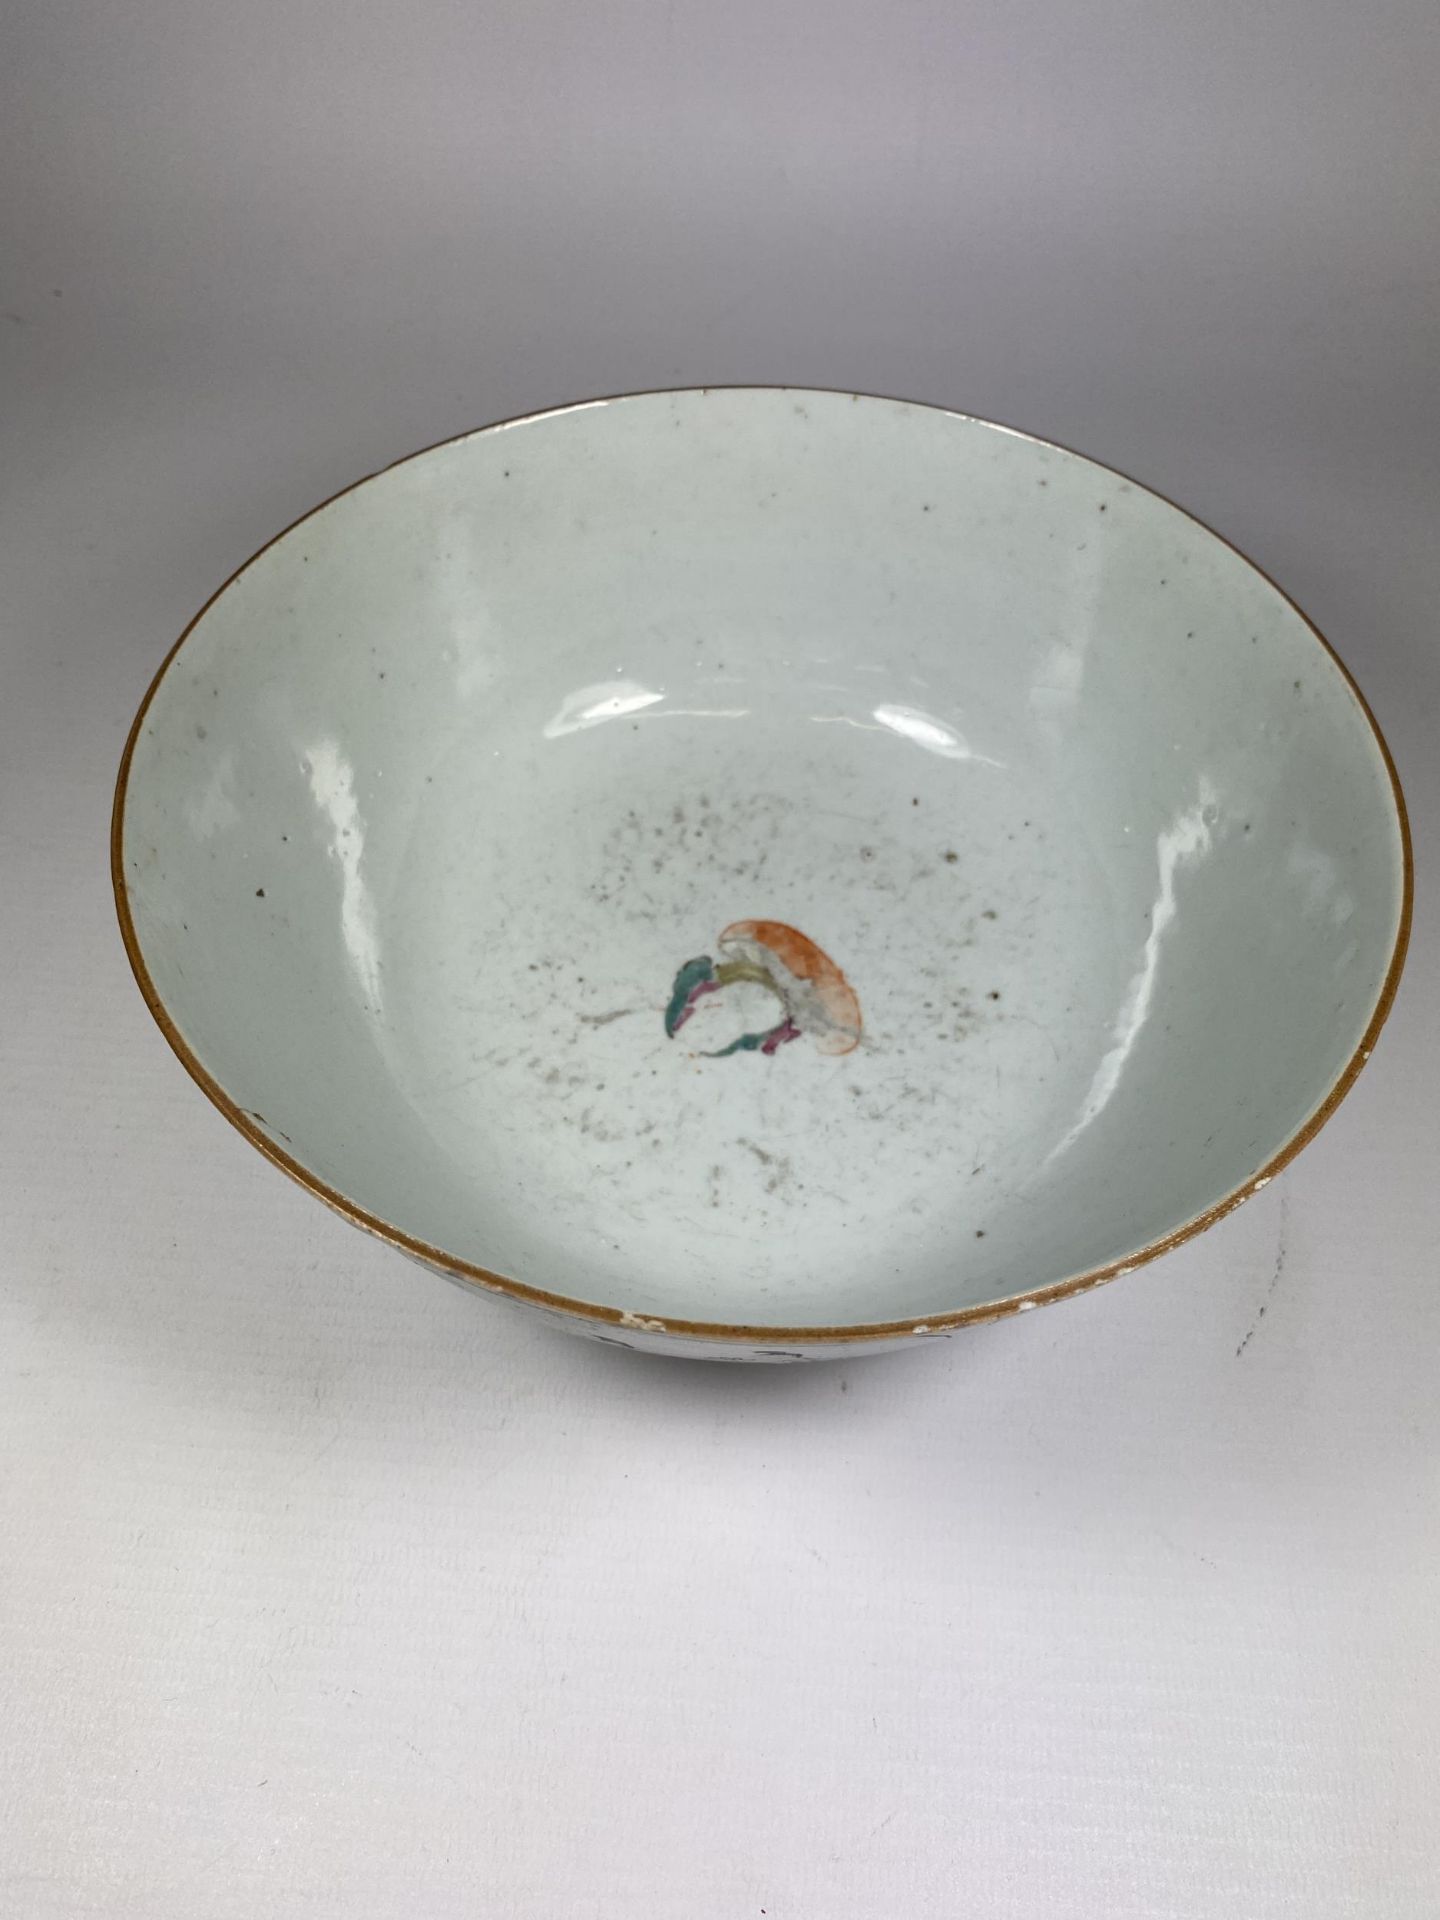 A LATE 18TH / EARLY 19TH CENTURY CHINESE PORCELAIN BOWL WITH ENAMELLED FIGURE DESIGN, DIAMETER 20CM - Image 4 of 8